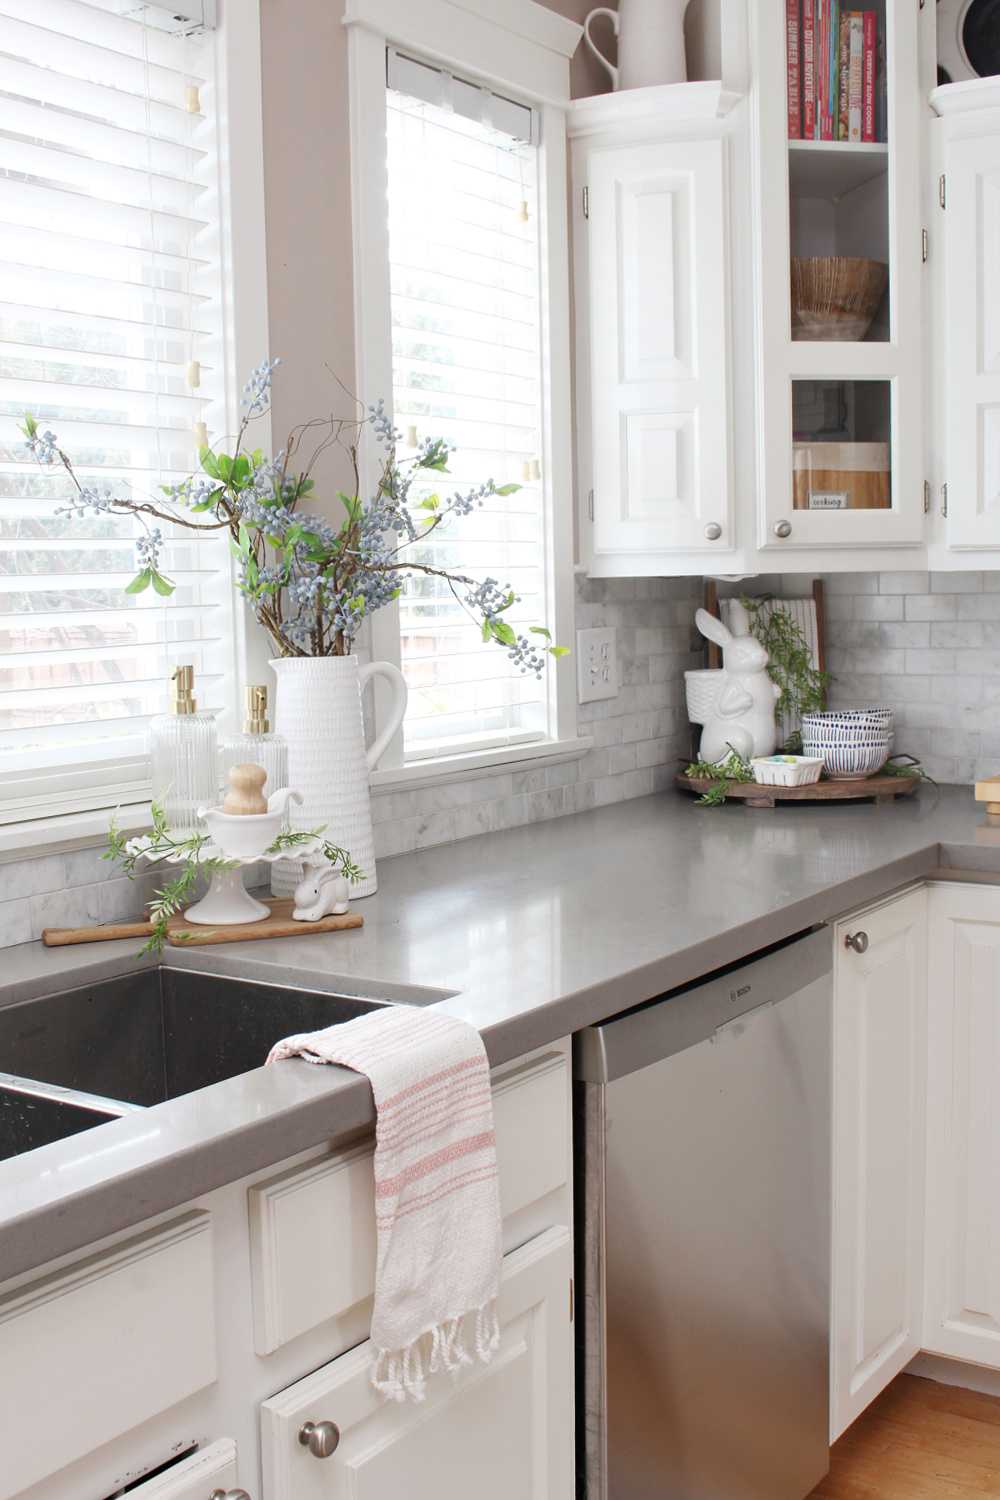 White kitchen decorated for spring with pops of blue and pink.